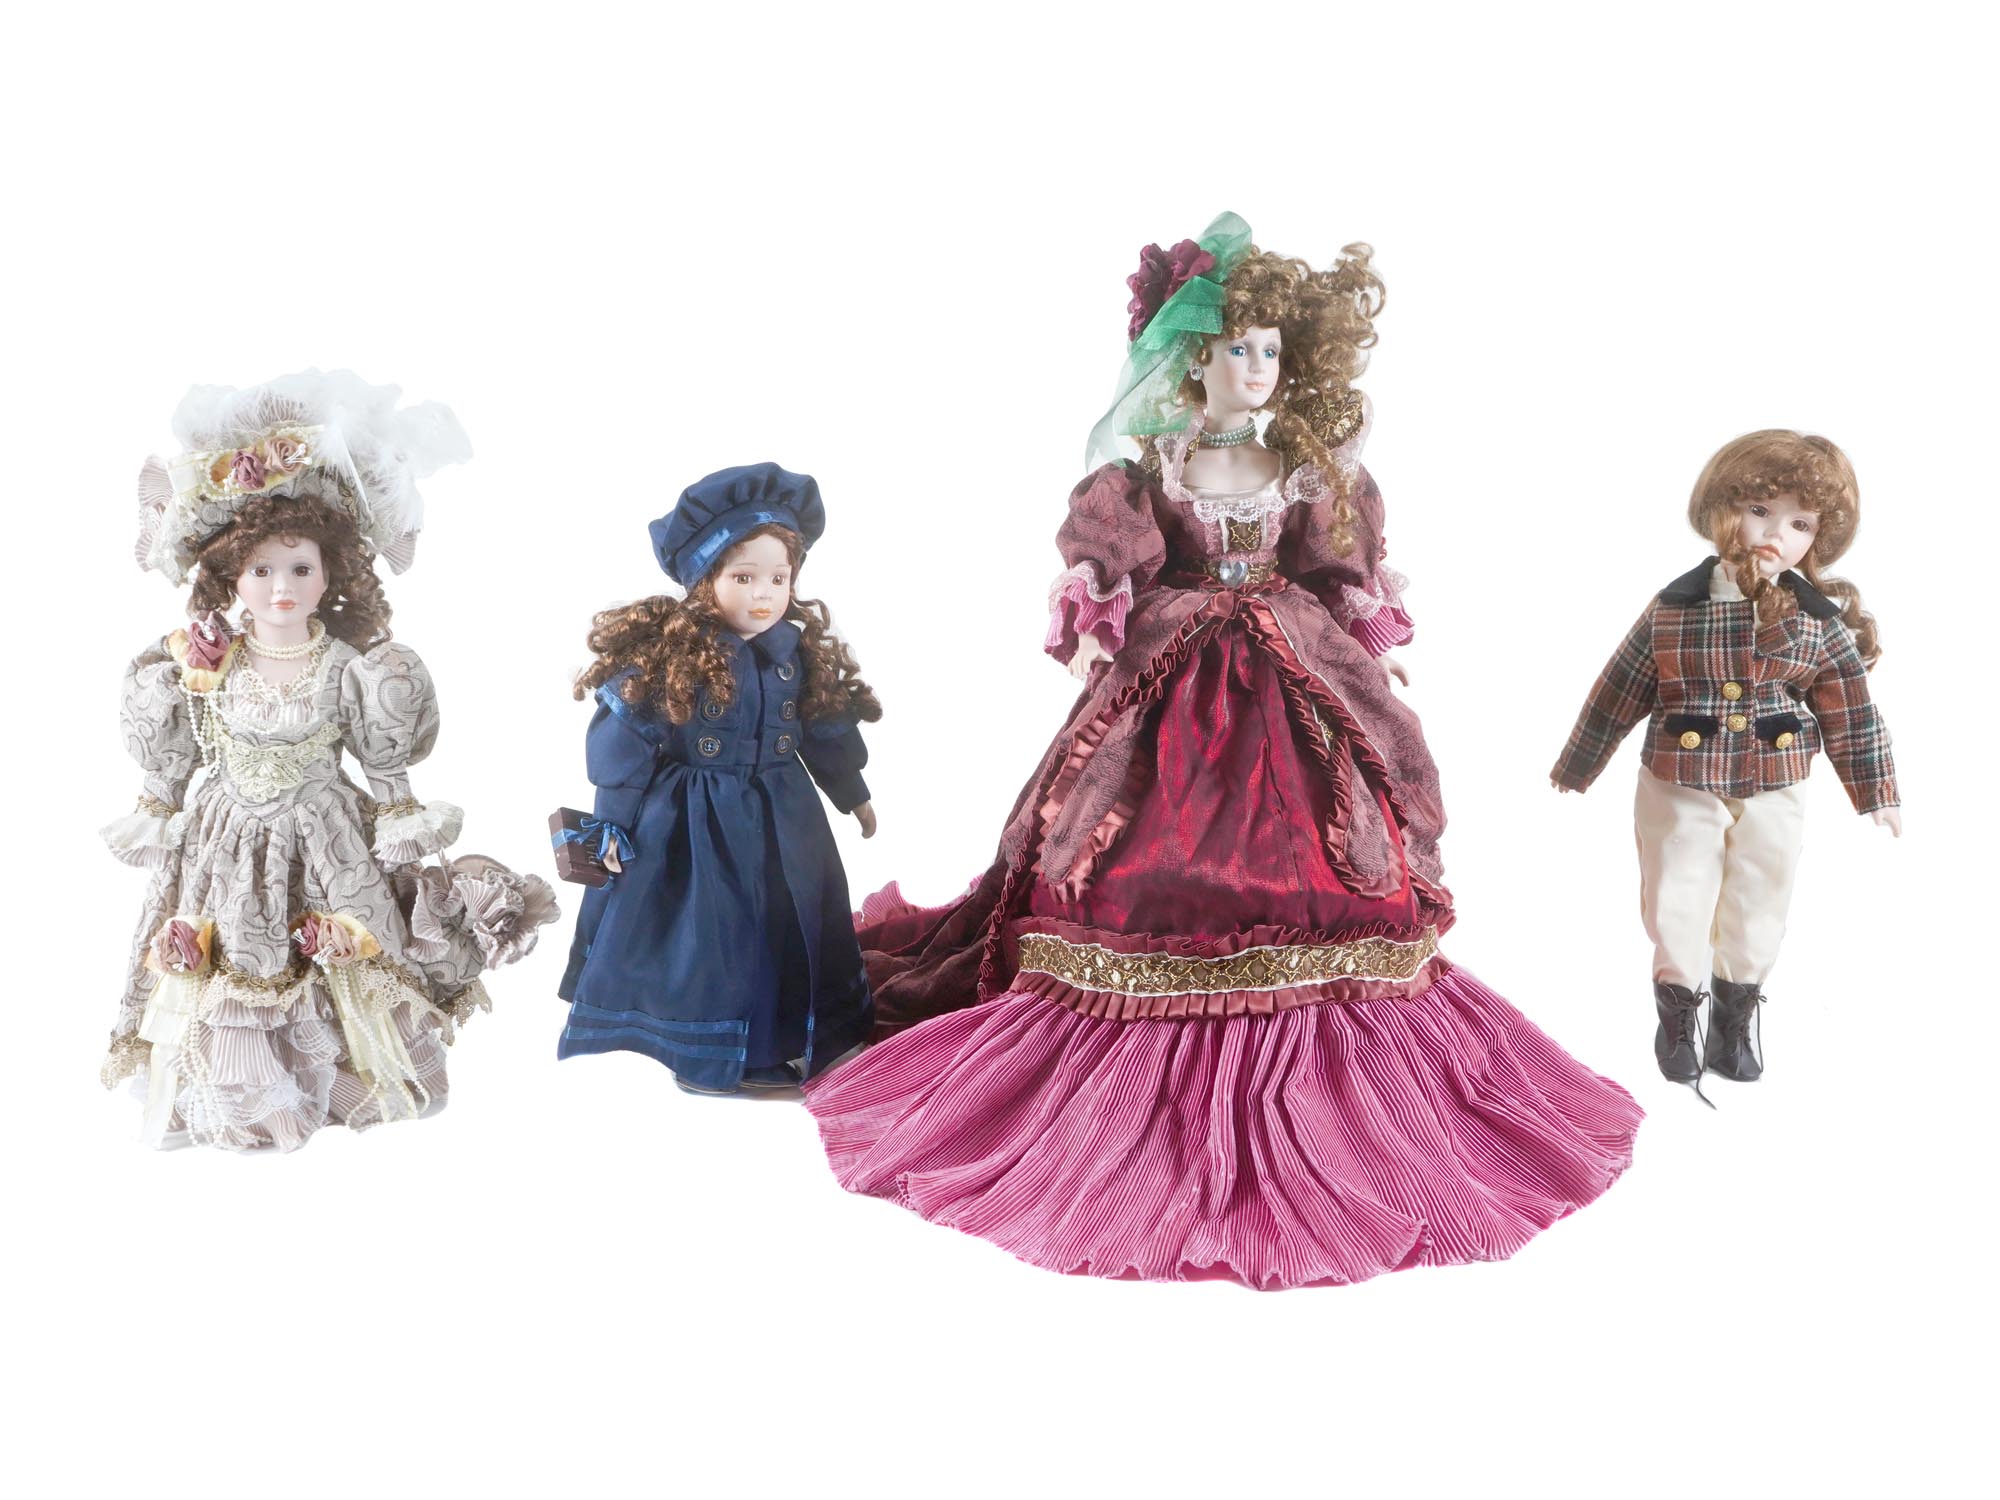 COLLECTION OF 4 VINTAGE AMERICAN PORCELAIN DOLLS PIC-0